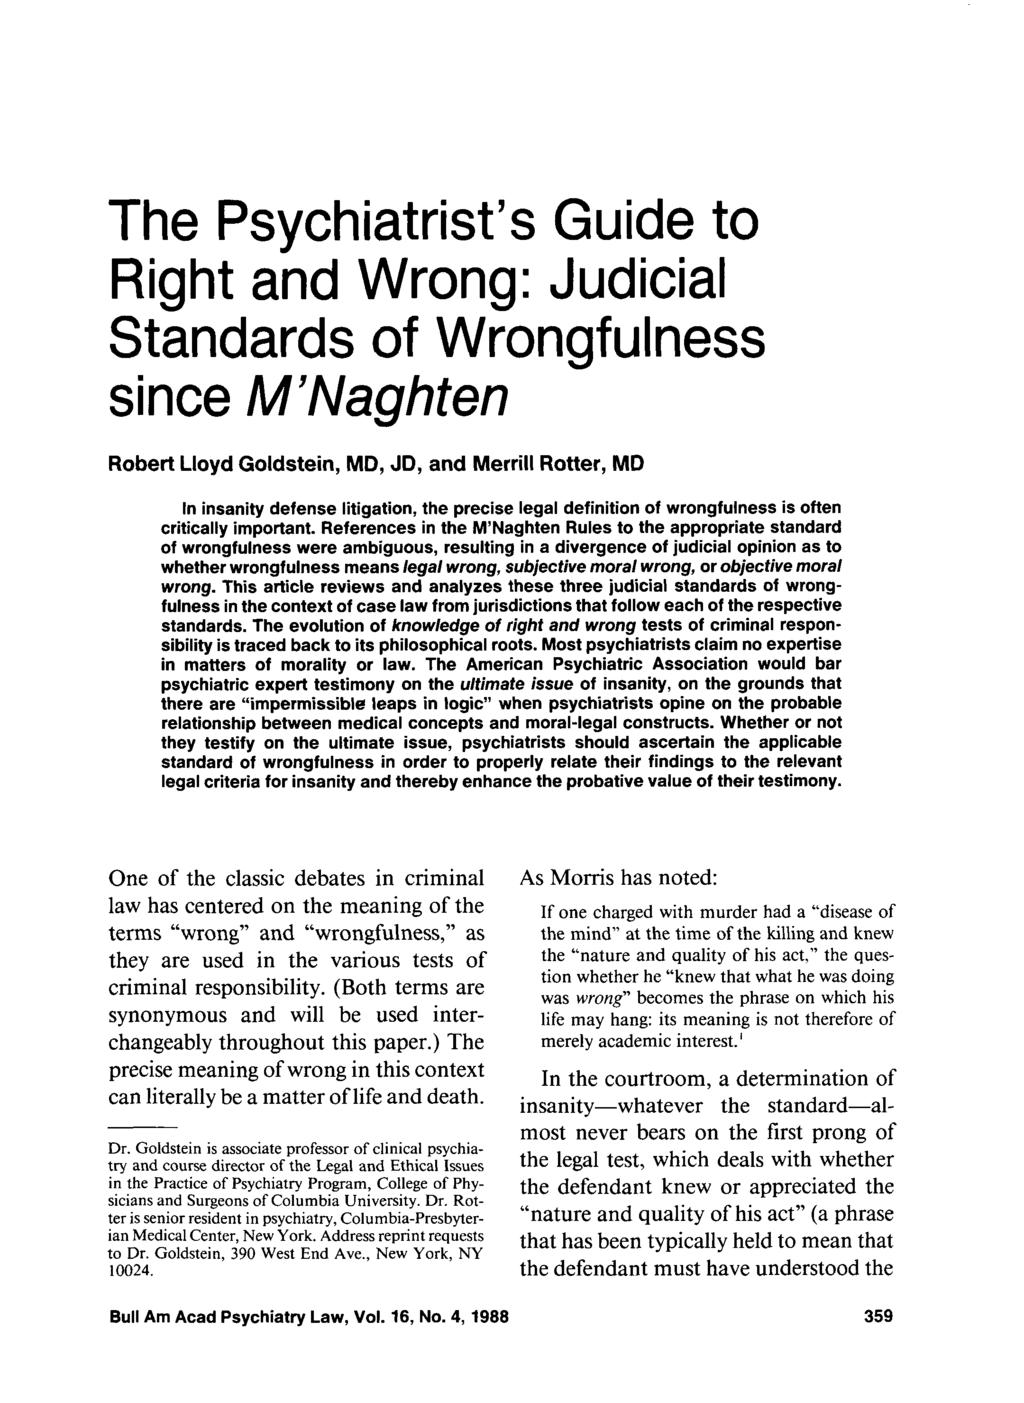 The Psvchiatrist's Guide to Right ahd Wrong: Judicial Standards of Wrongfulness - since M 'Naghten Robert Lloyd Goldstein, MD, JD, and Merrill Rotter, MD In insanity defense litigation, the precise